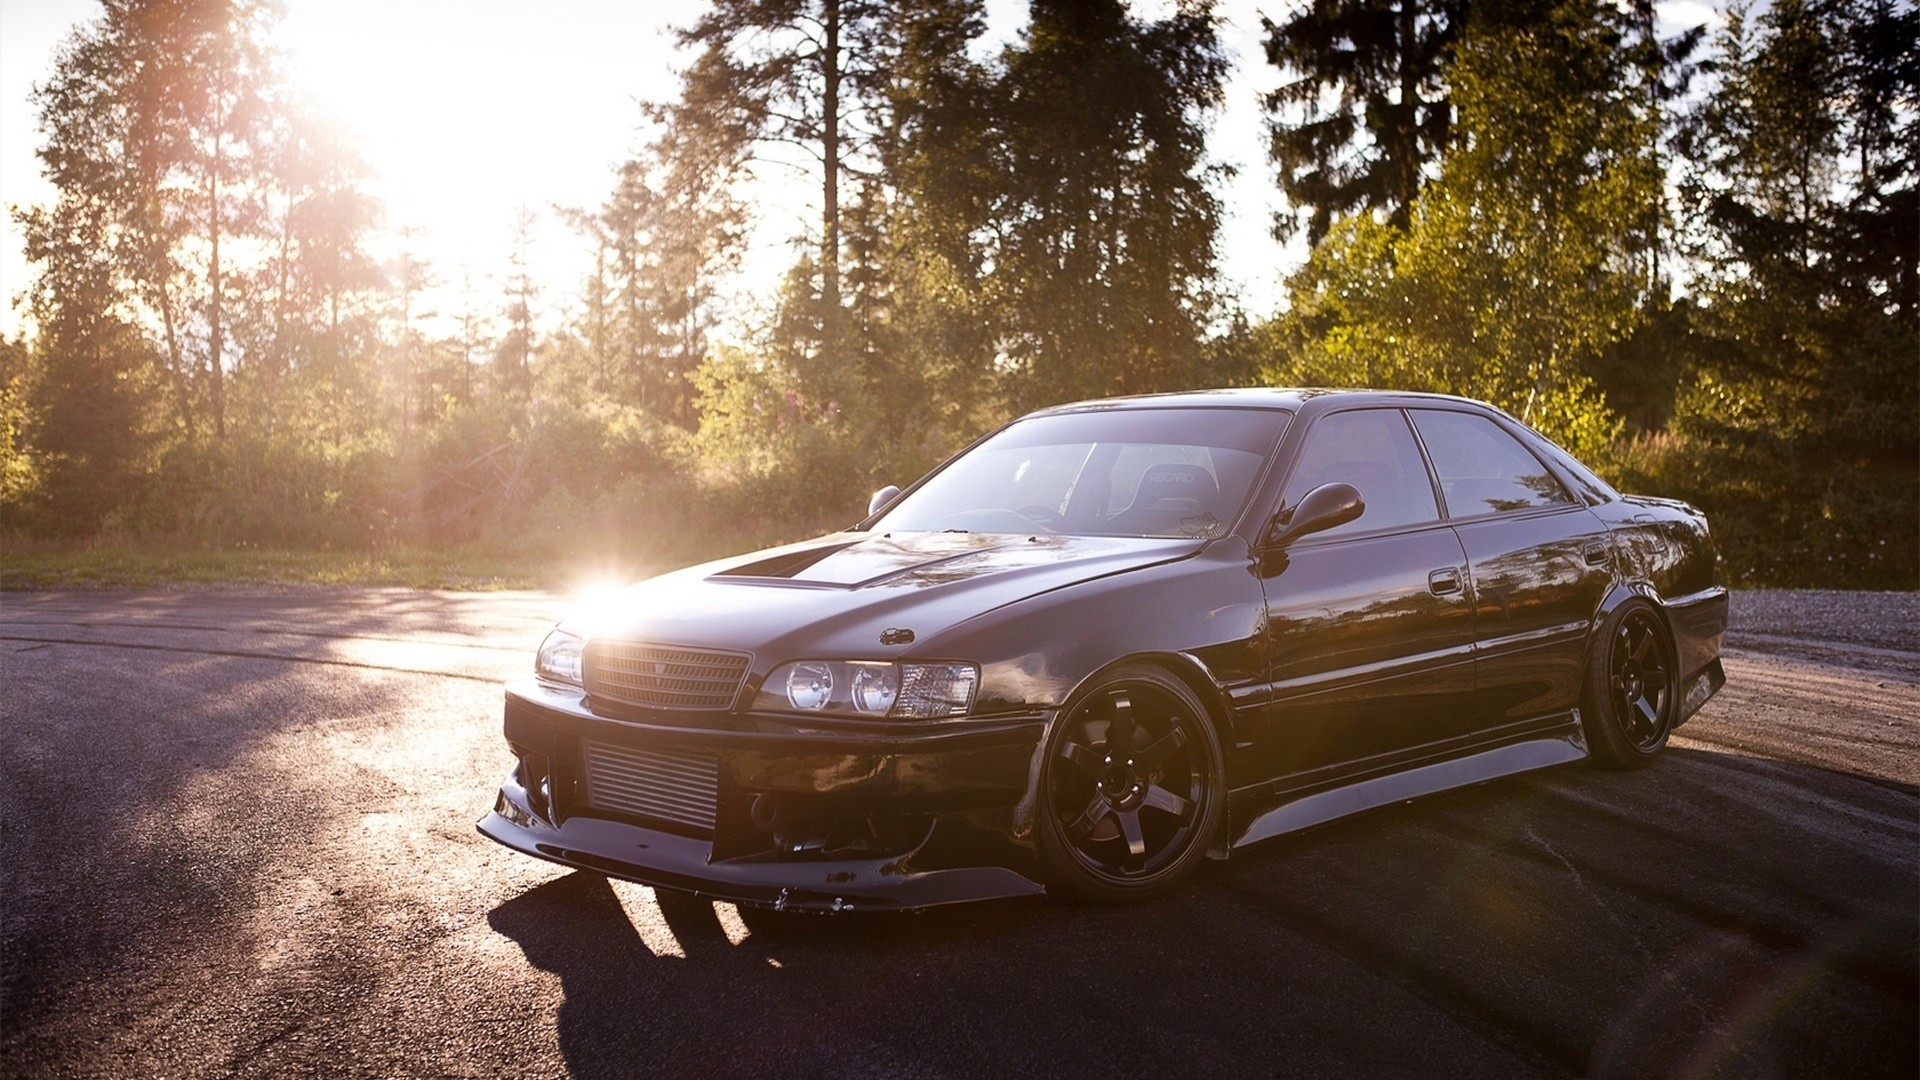 Toyota Chaser - HD Wallpaper 